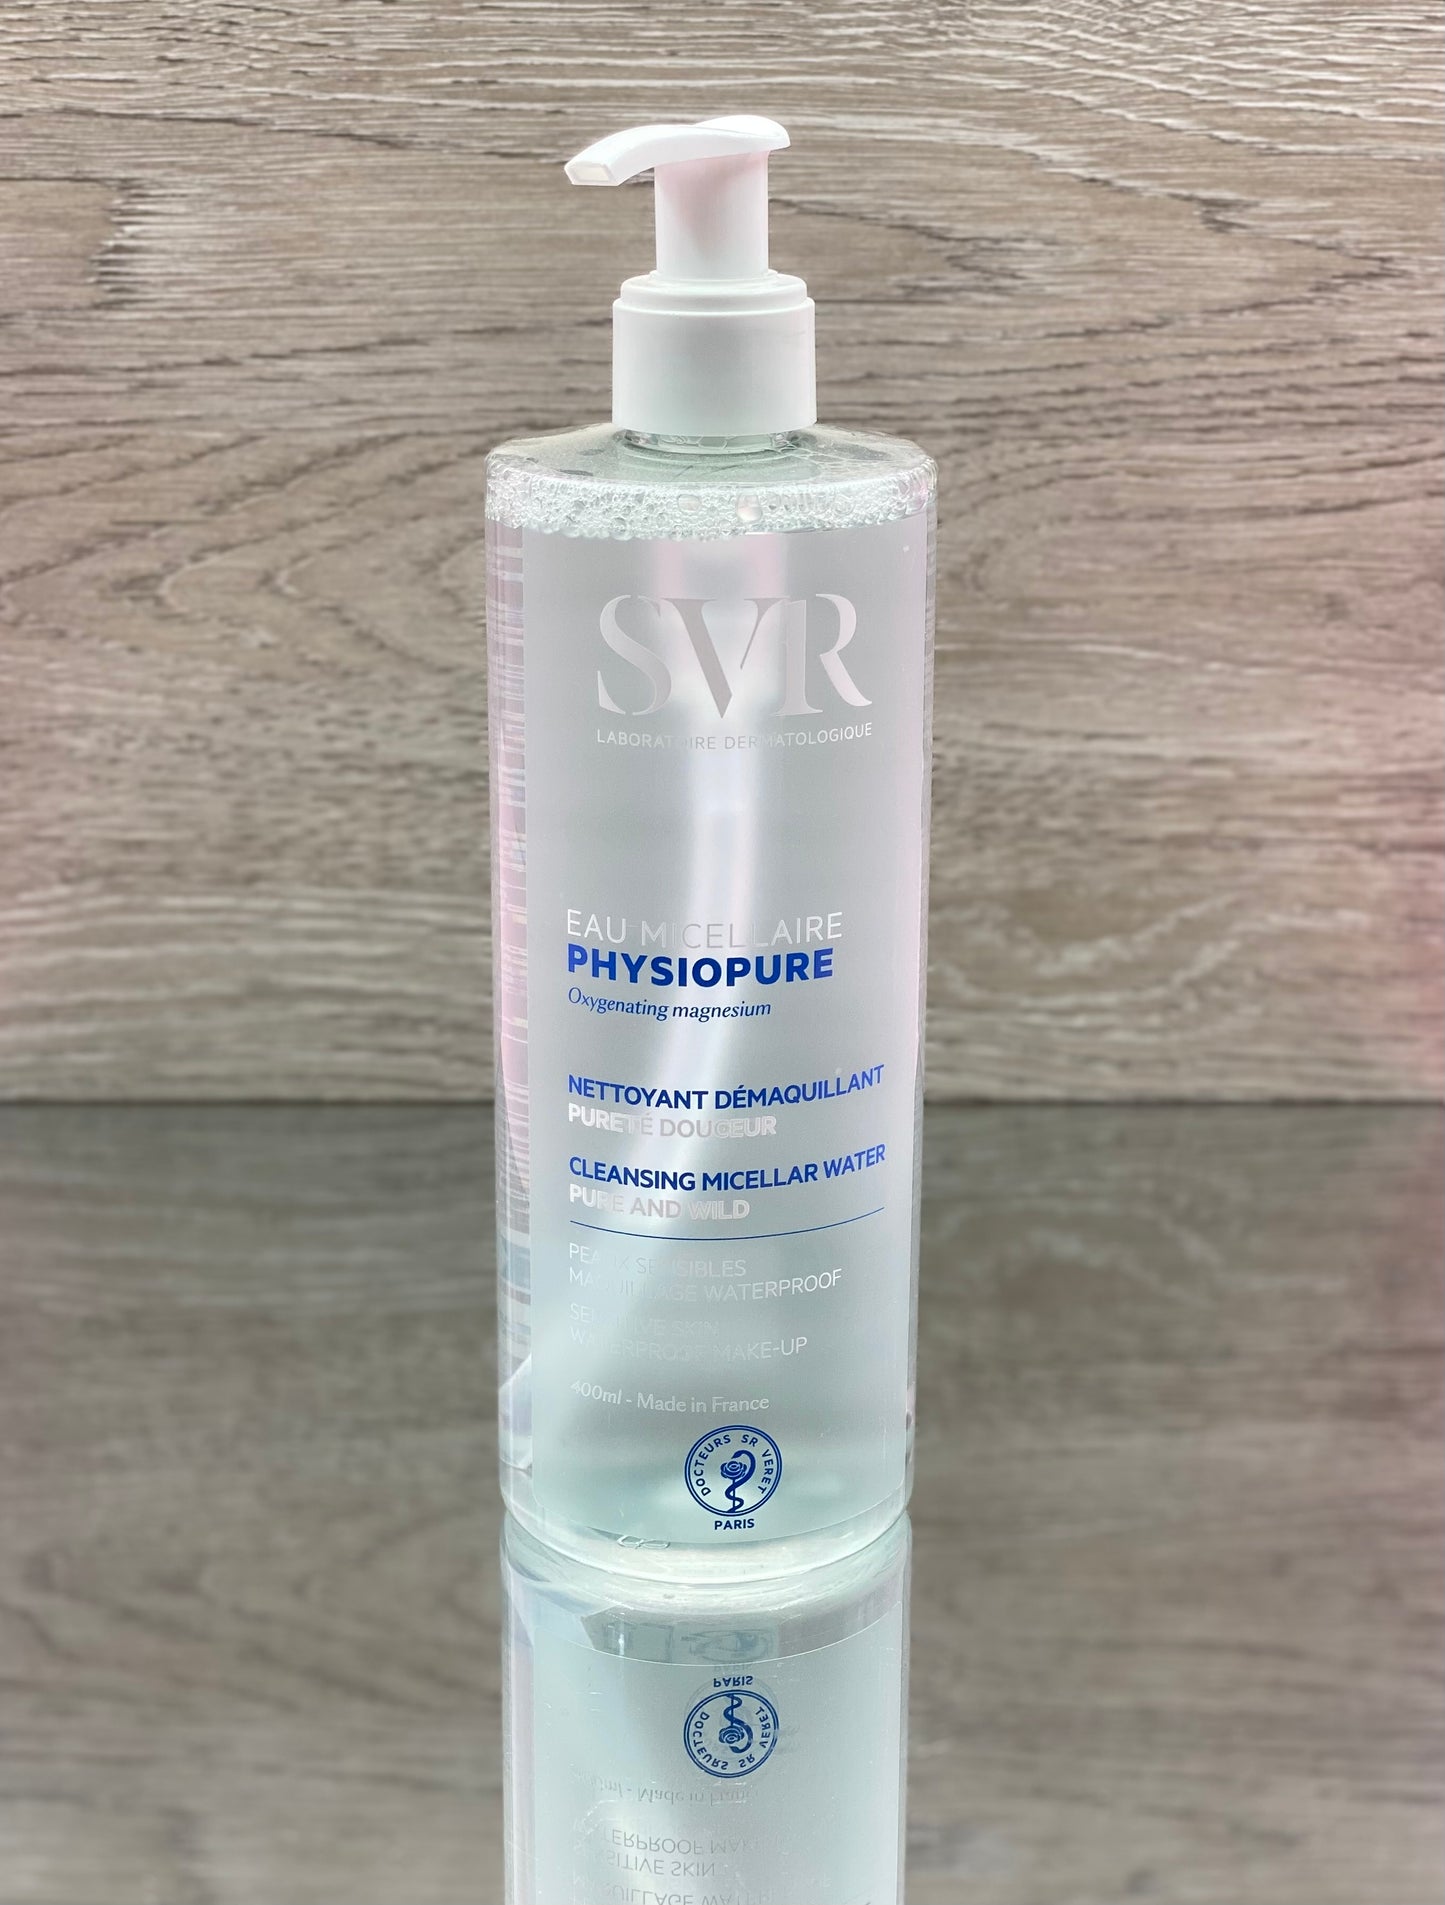 SVR Physiopure Eau Micellaire - 400ml